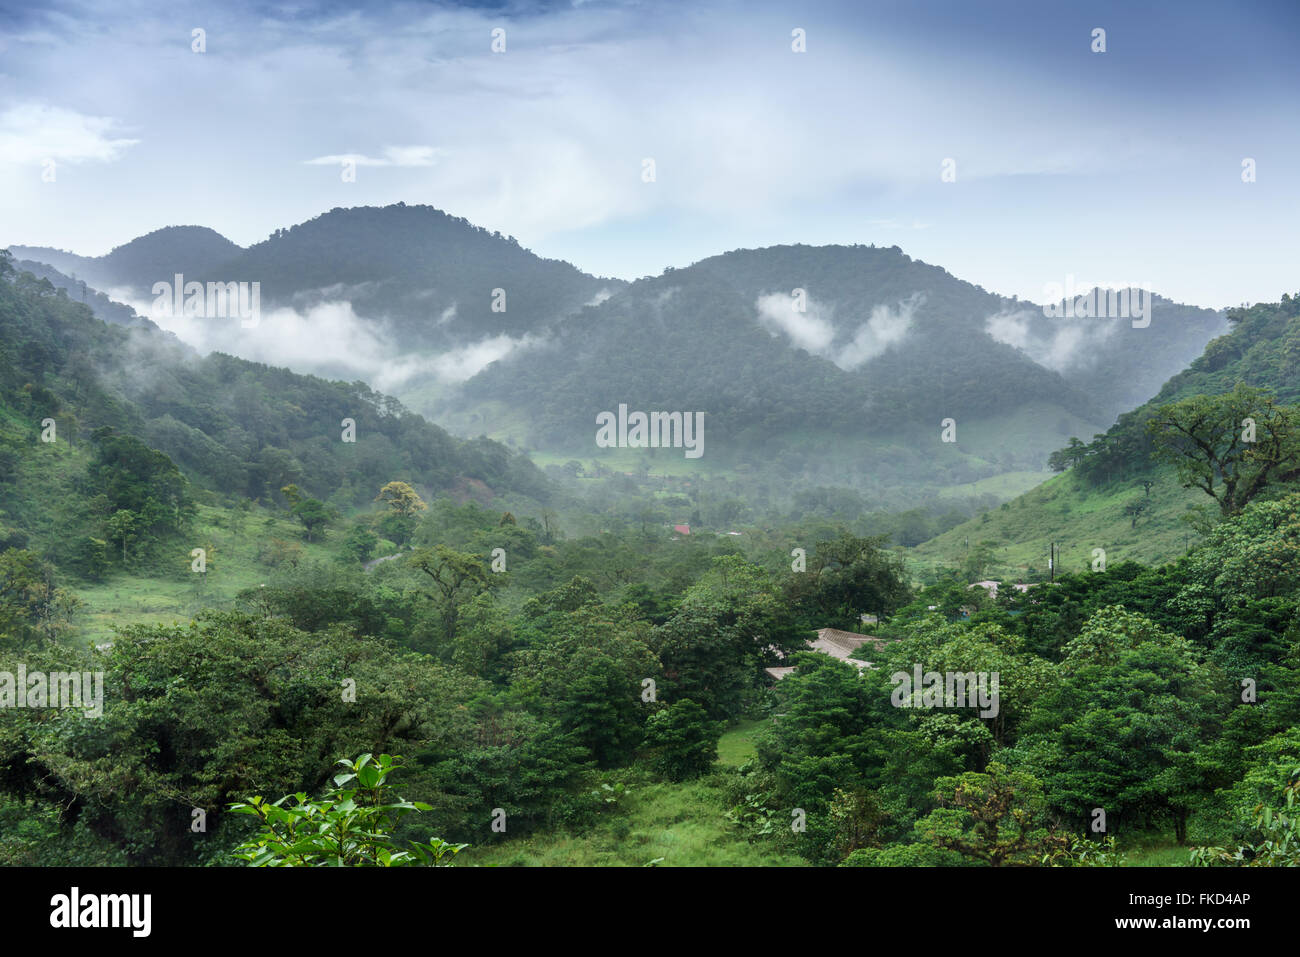 Scenic view of mountains in foggy weather, Costa Rica Stock Photo